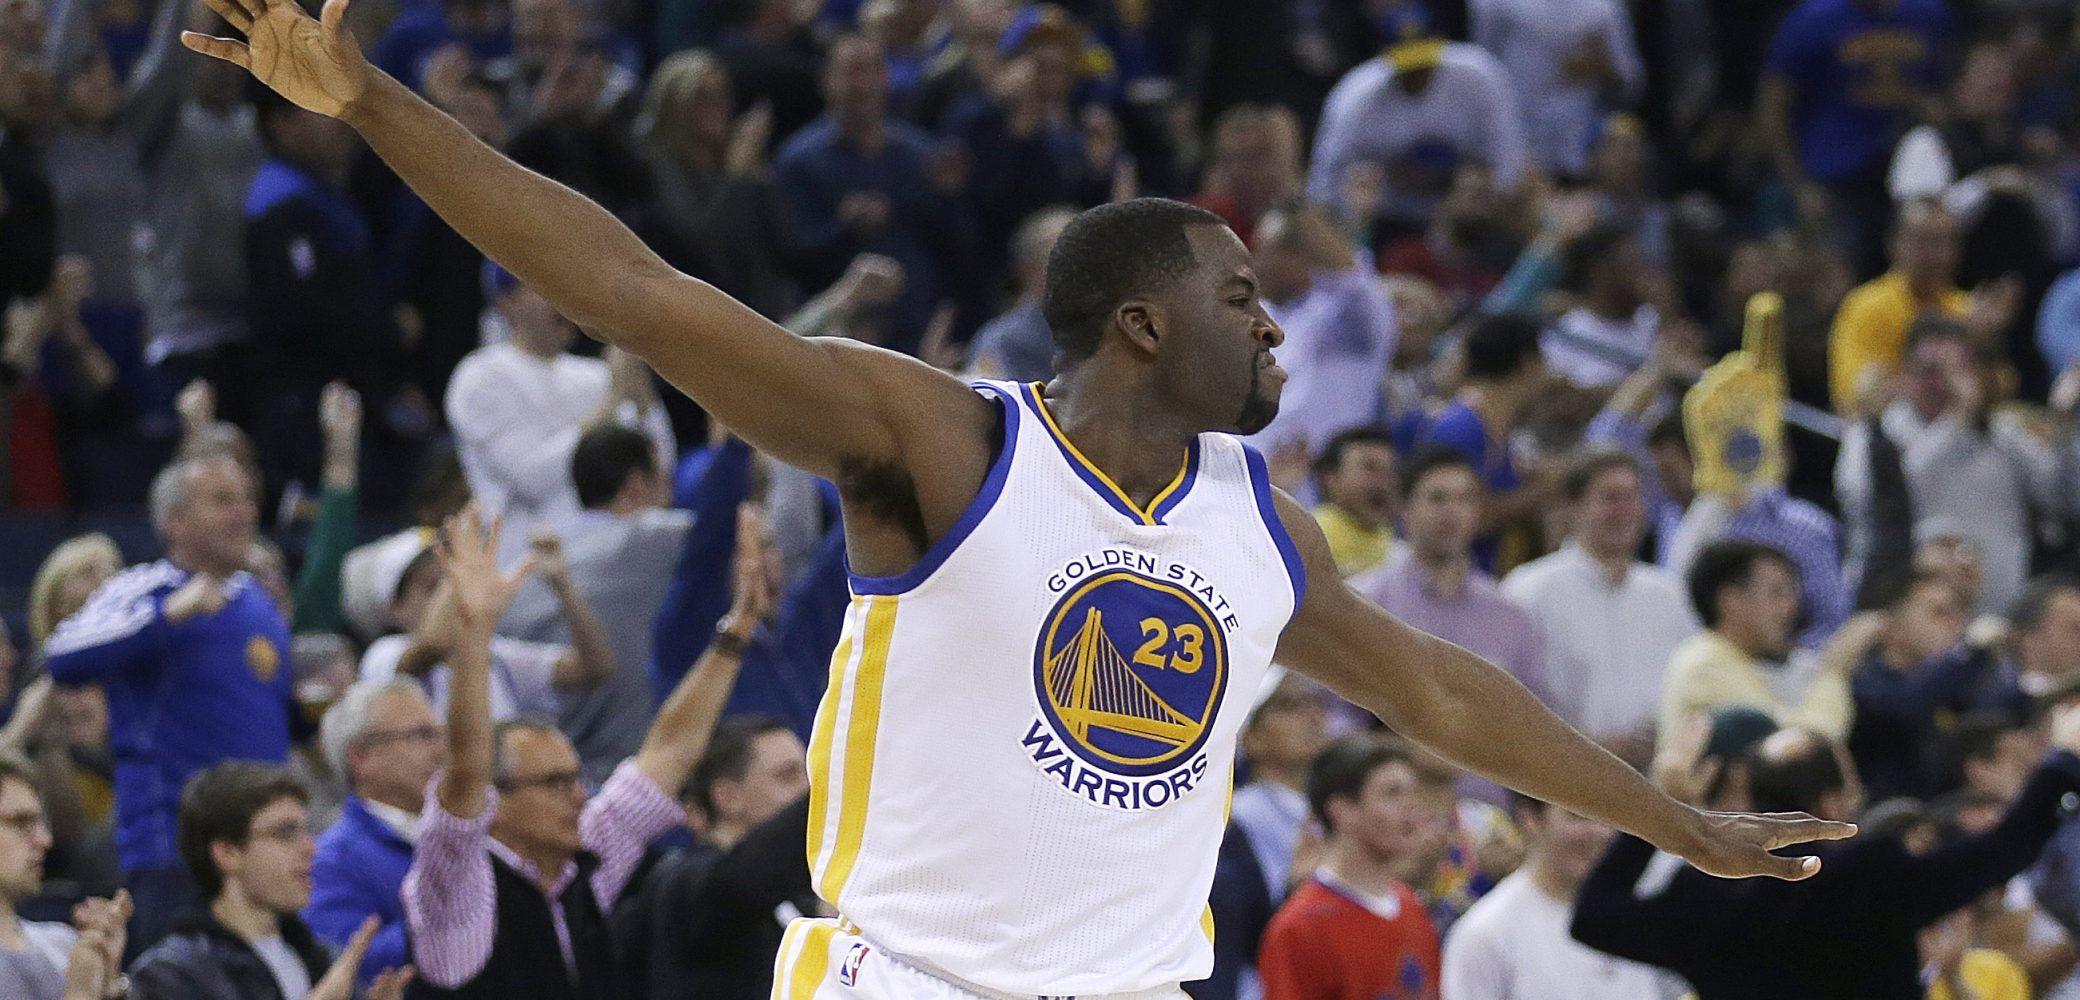 Report: Draymond Green Has 'Significant Interest' in Signing With